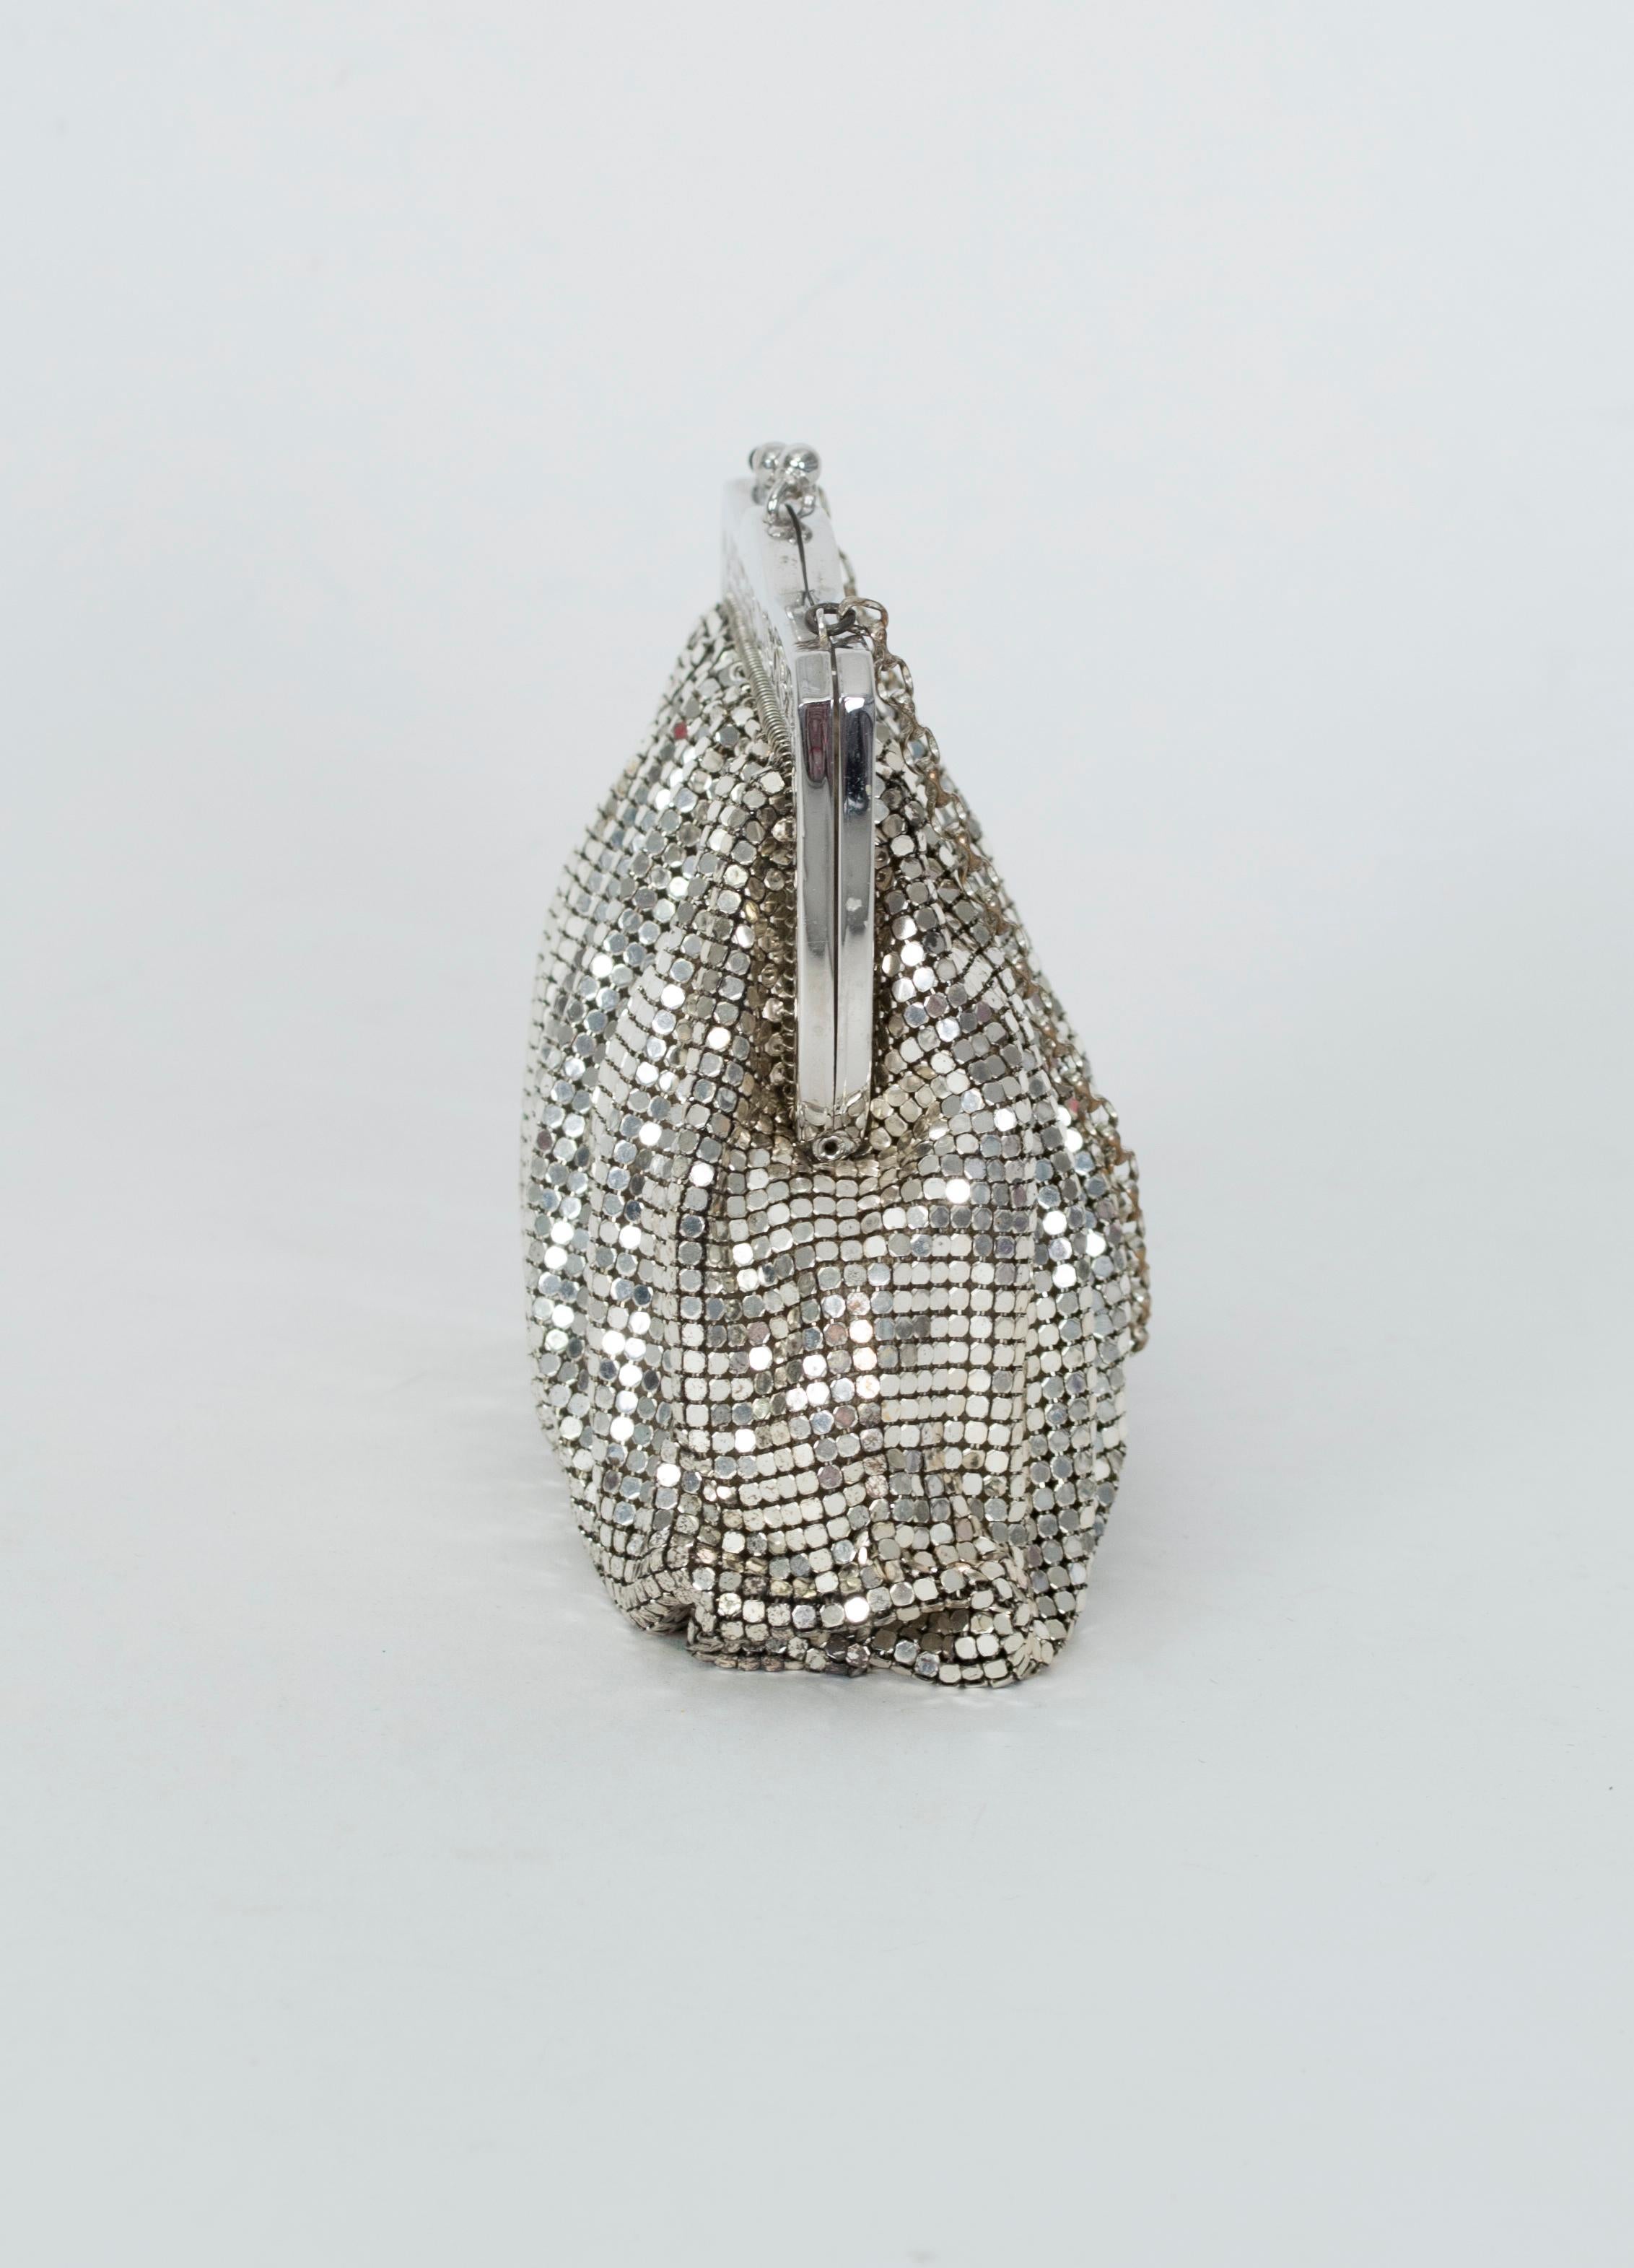 An evening bag that bridges decades, this liquid silver mesh purse looks equally appropriate with a mid-century sheath as it does with a slithery disco halter dress. In scarce and sparkling silver as opposed to the more abundant gold models, it